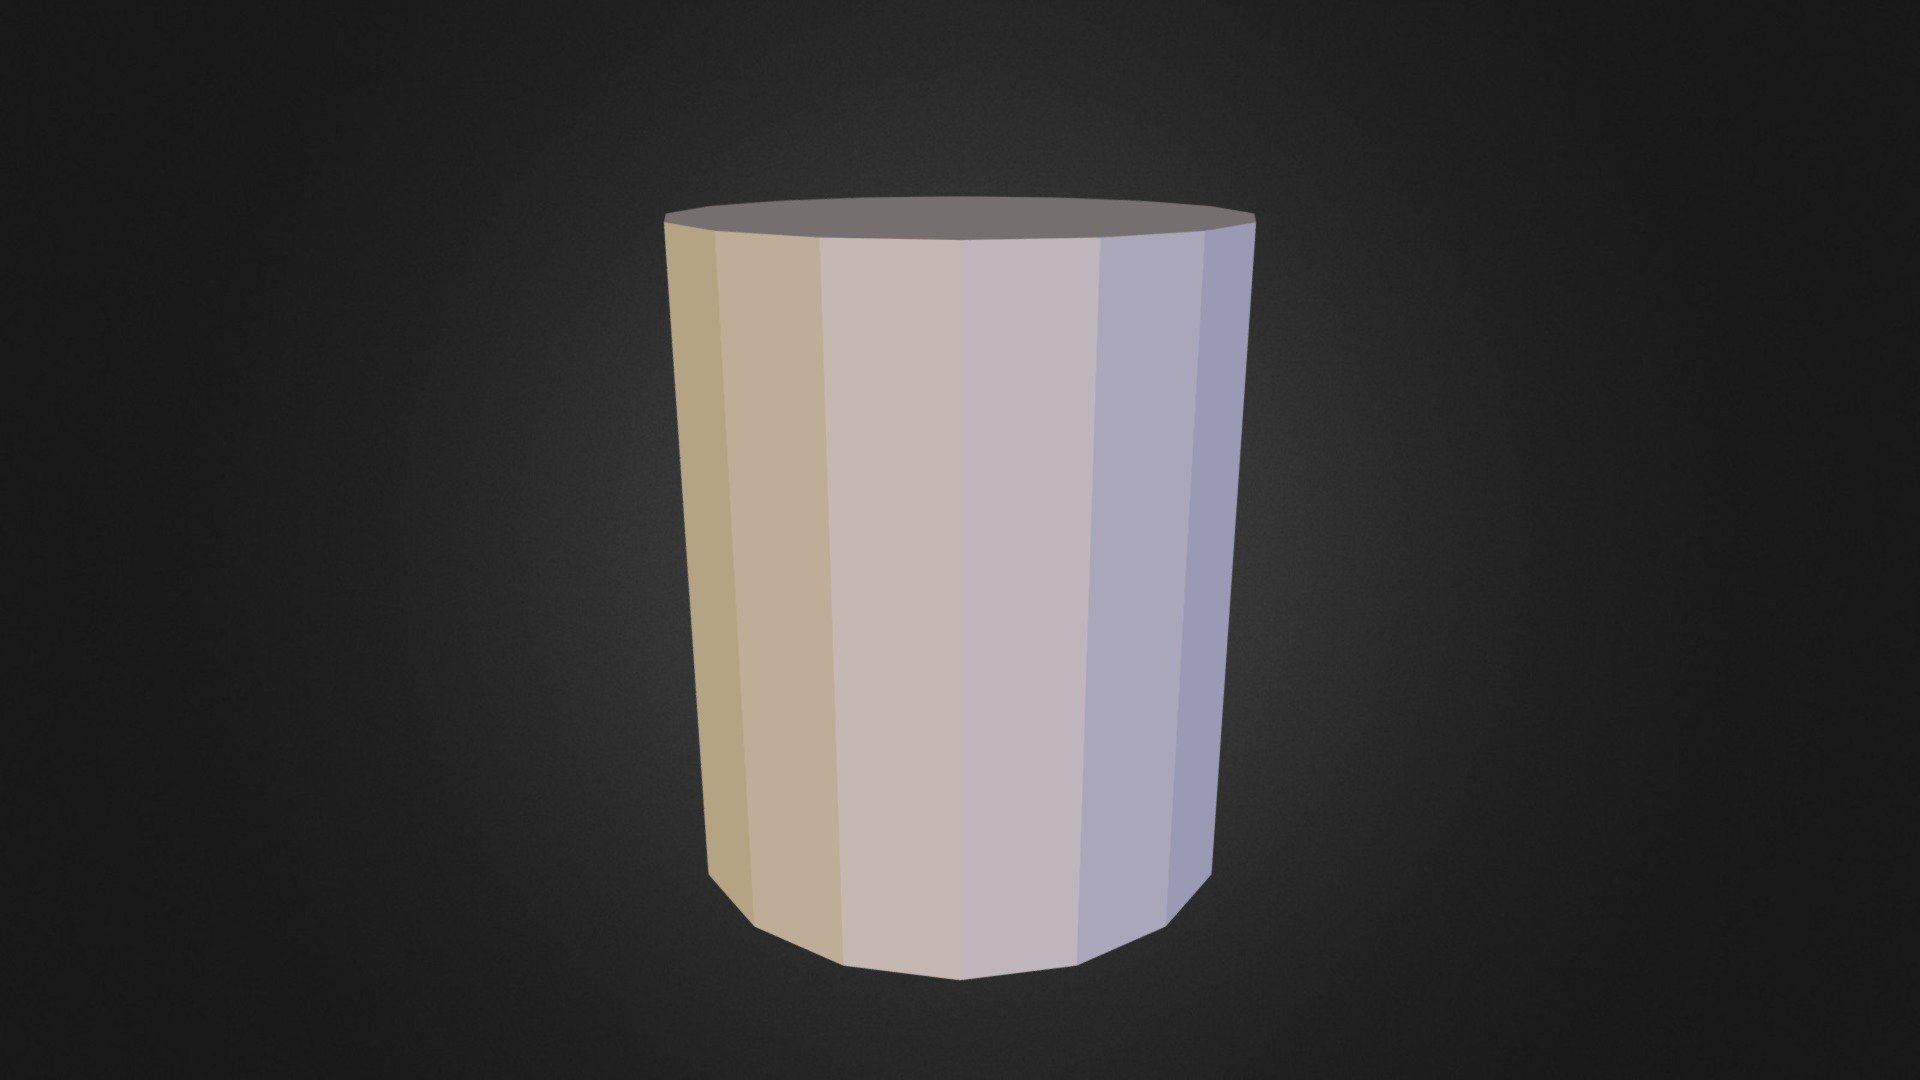 Barrel with Normal Mapping and Texture #1 - 3D model by alexwallace ...